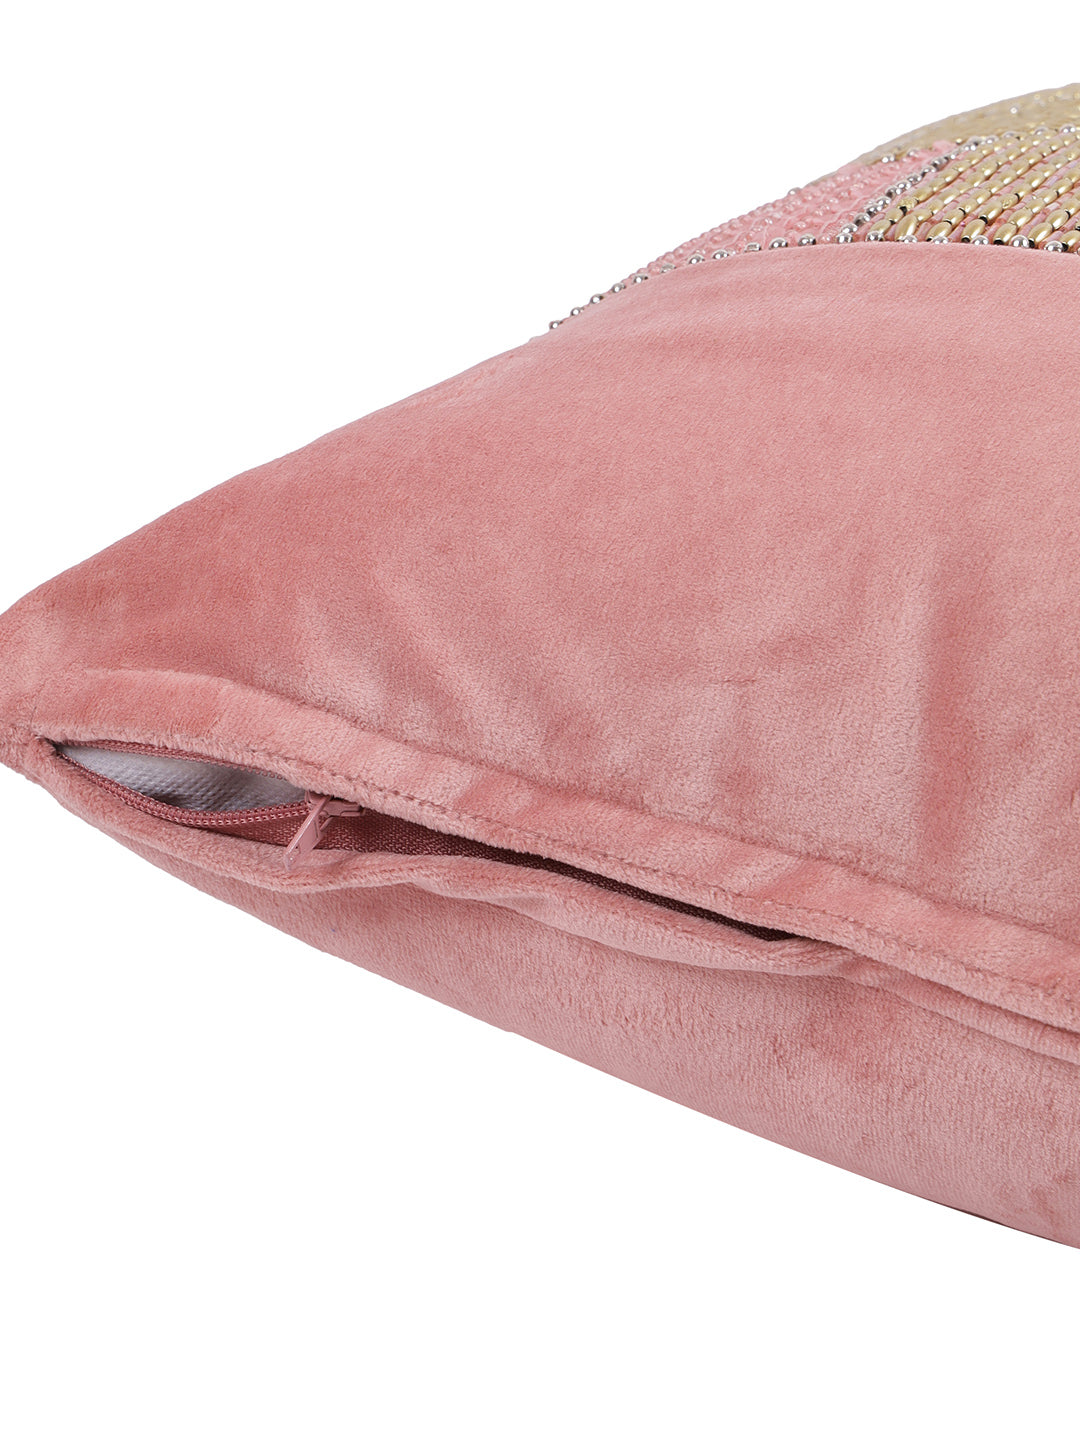 Set Of 2 Peach-coloured & Gold-Toned Embellished Velvet Square Cushion Covers